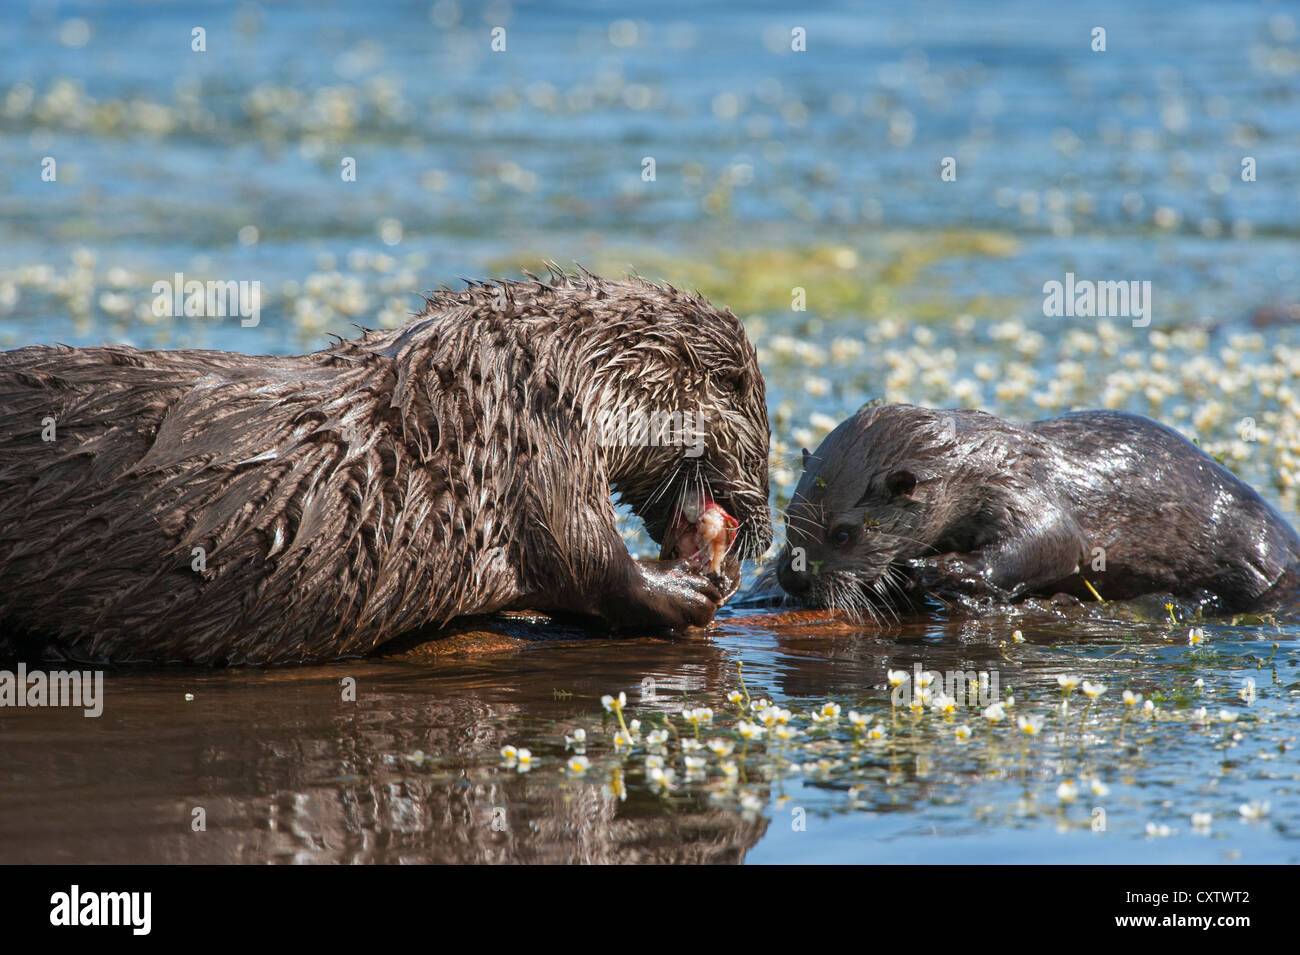 A River Otter pup looks on enviously at her mother's meal, Northern Rockies Stock Photo